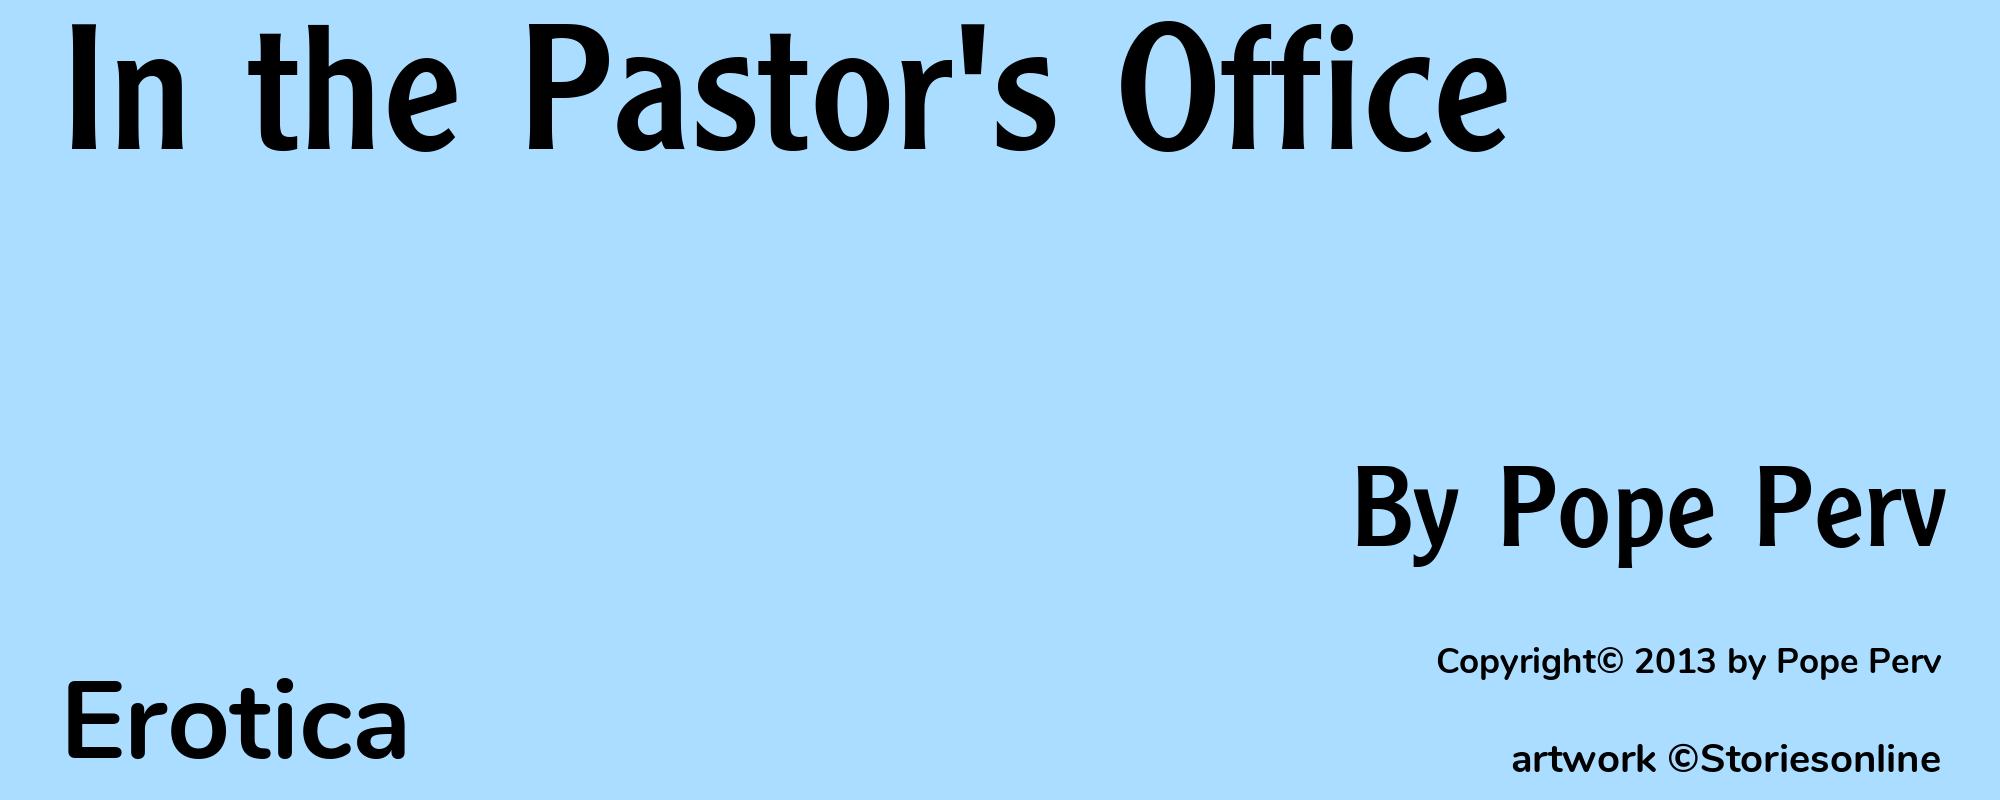 In the Pastor's Office - Cover